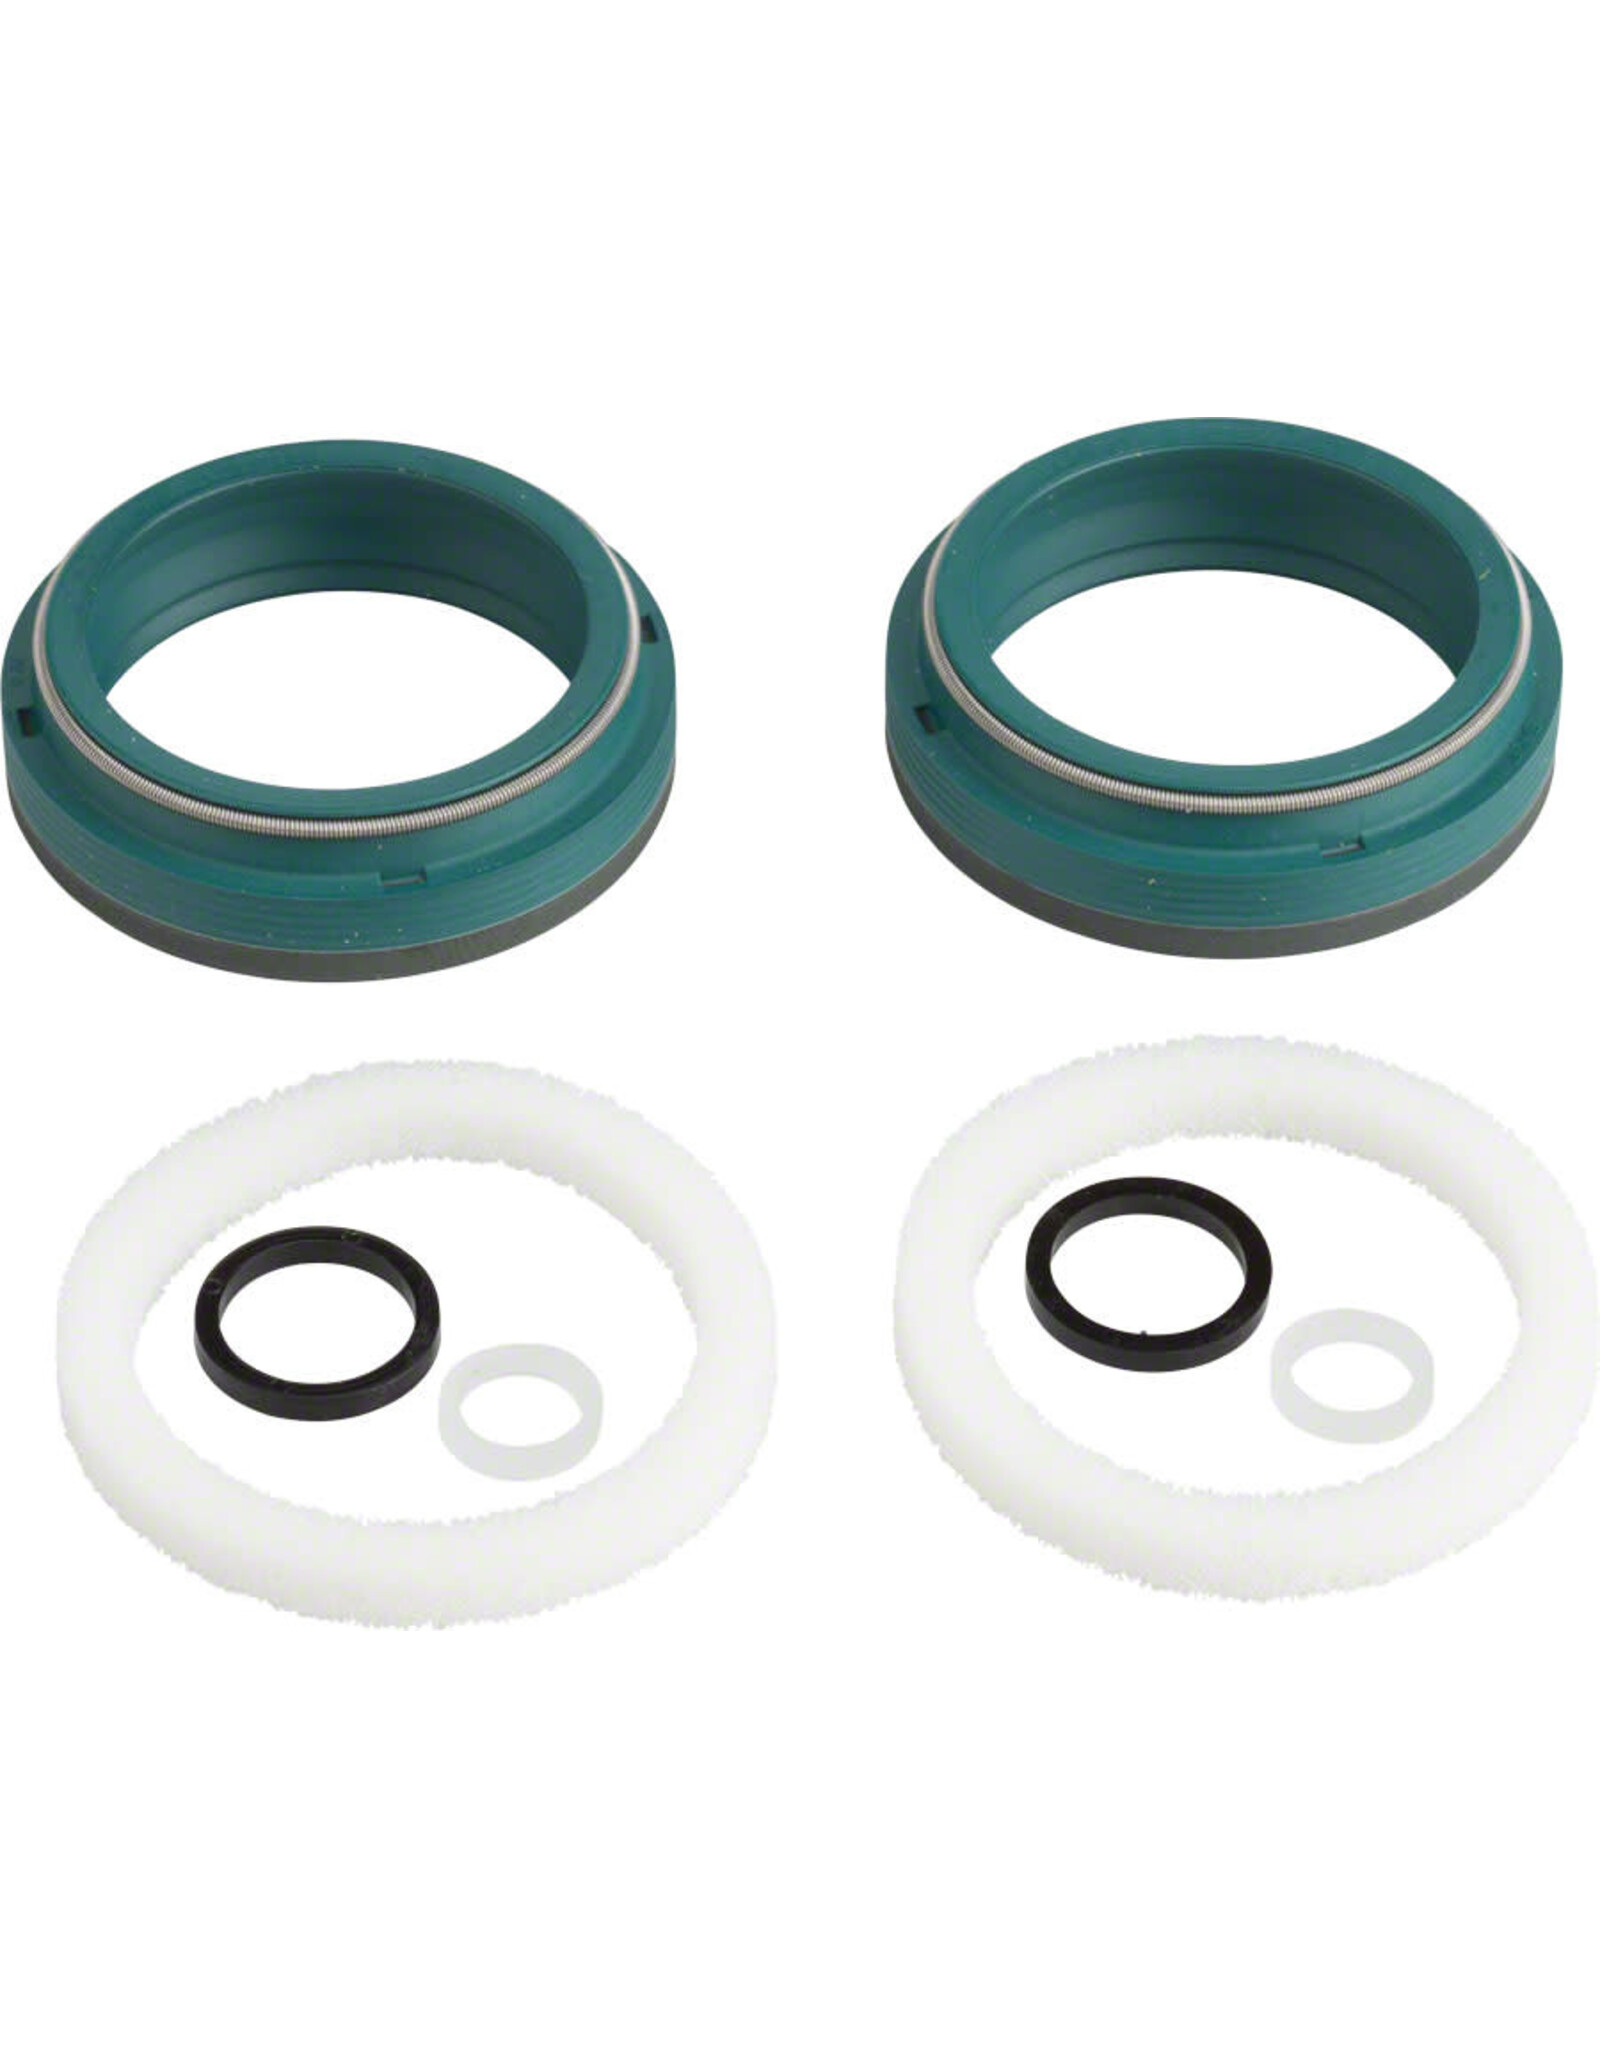 SKF SKF Low-Friction Dust Wiper Seal Kit: Fox 34mm, Fits 2016-Current Forks